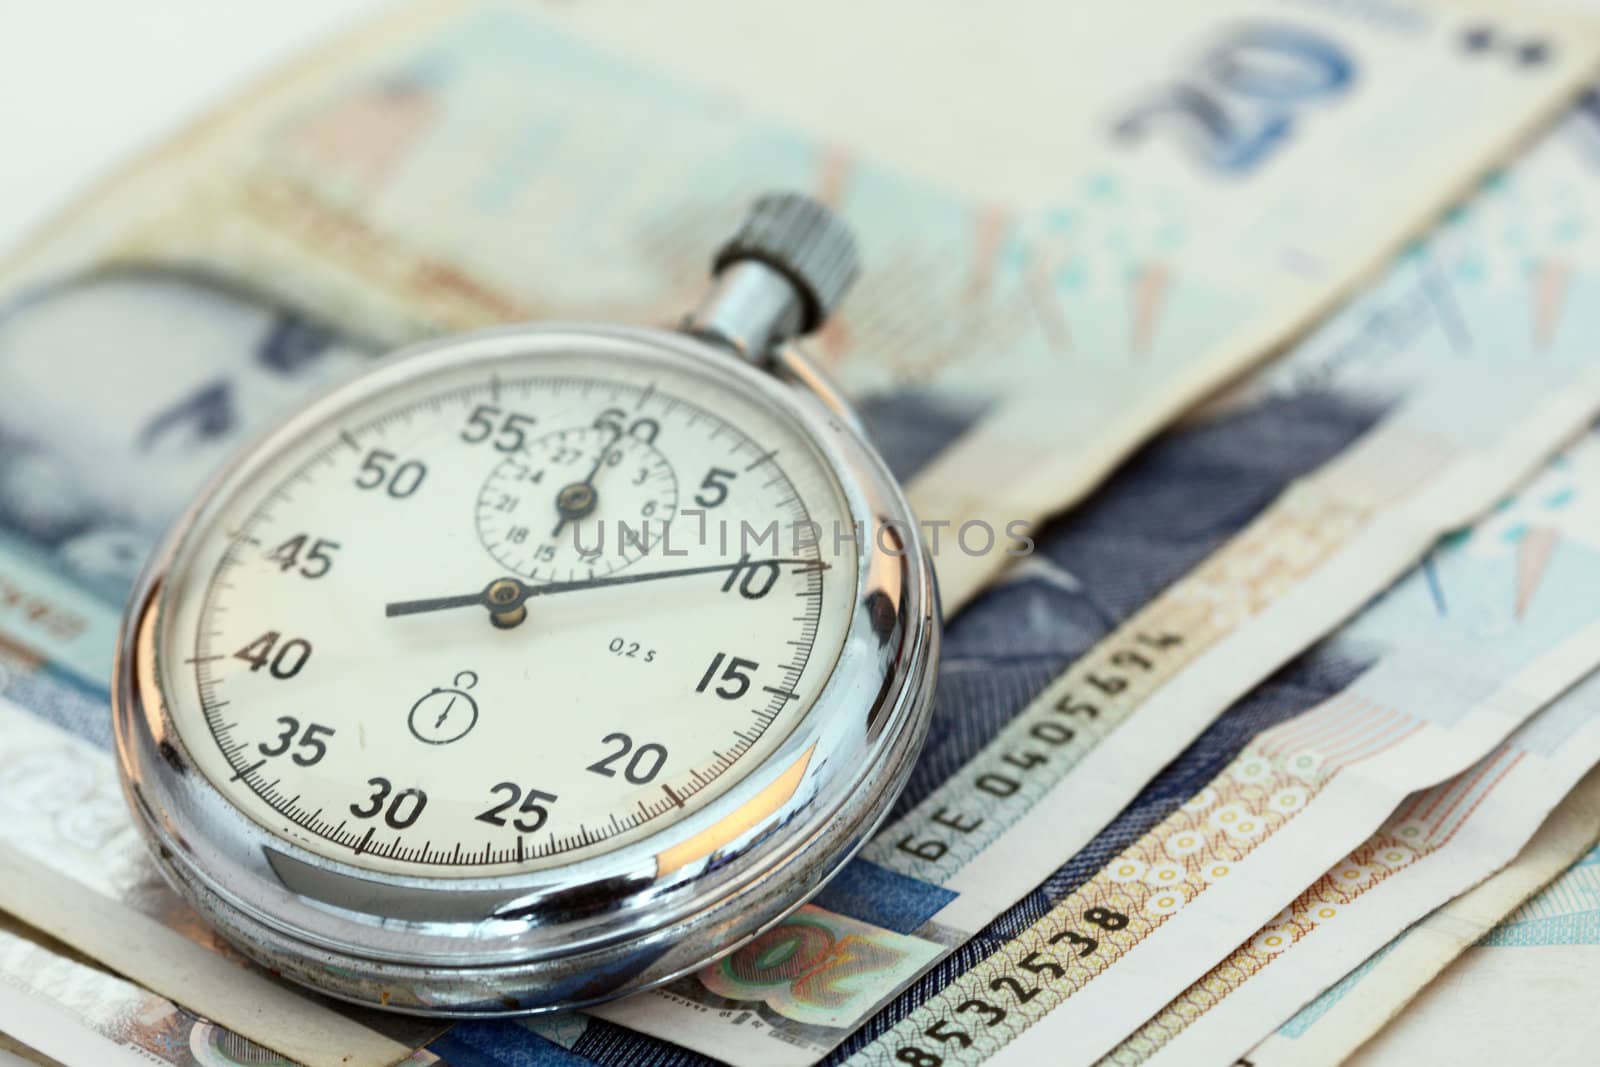 Chronometer and Bulgarian currency close up, shallow dof